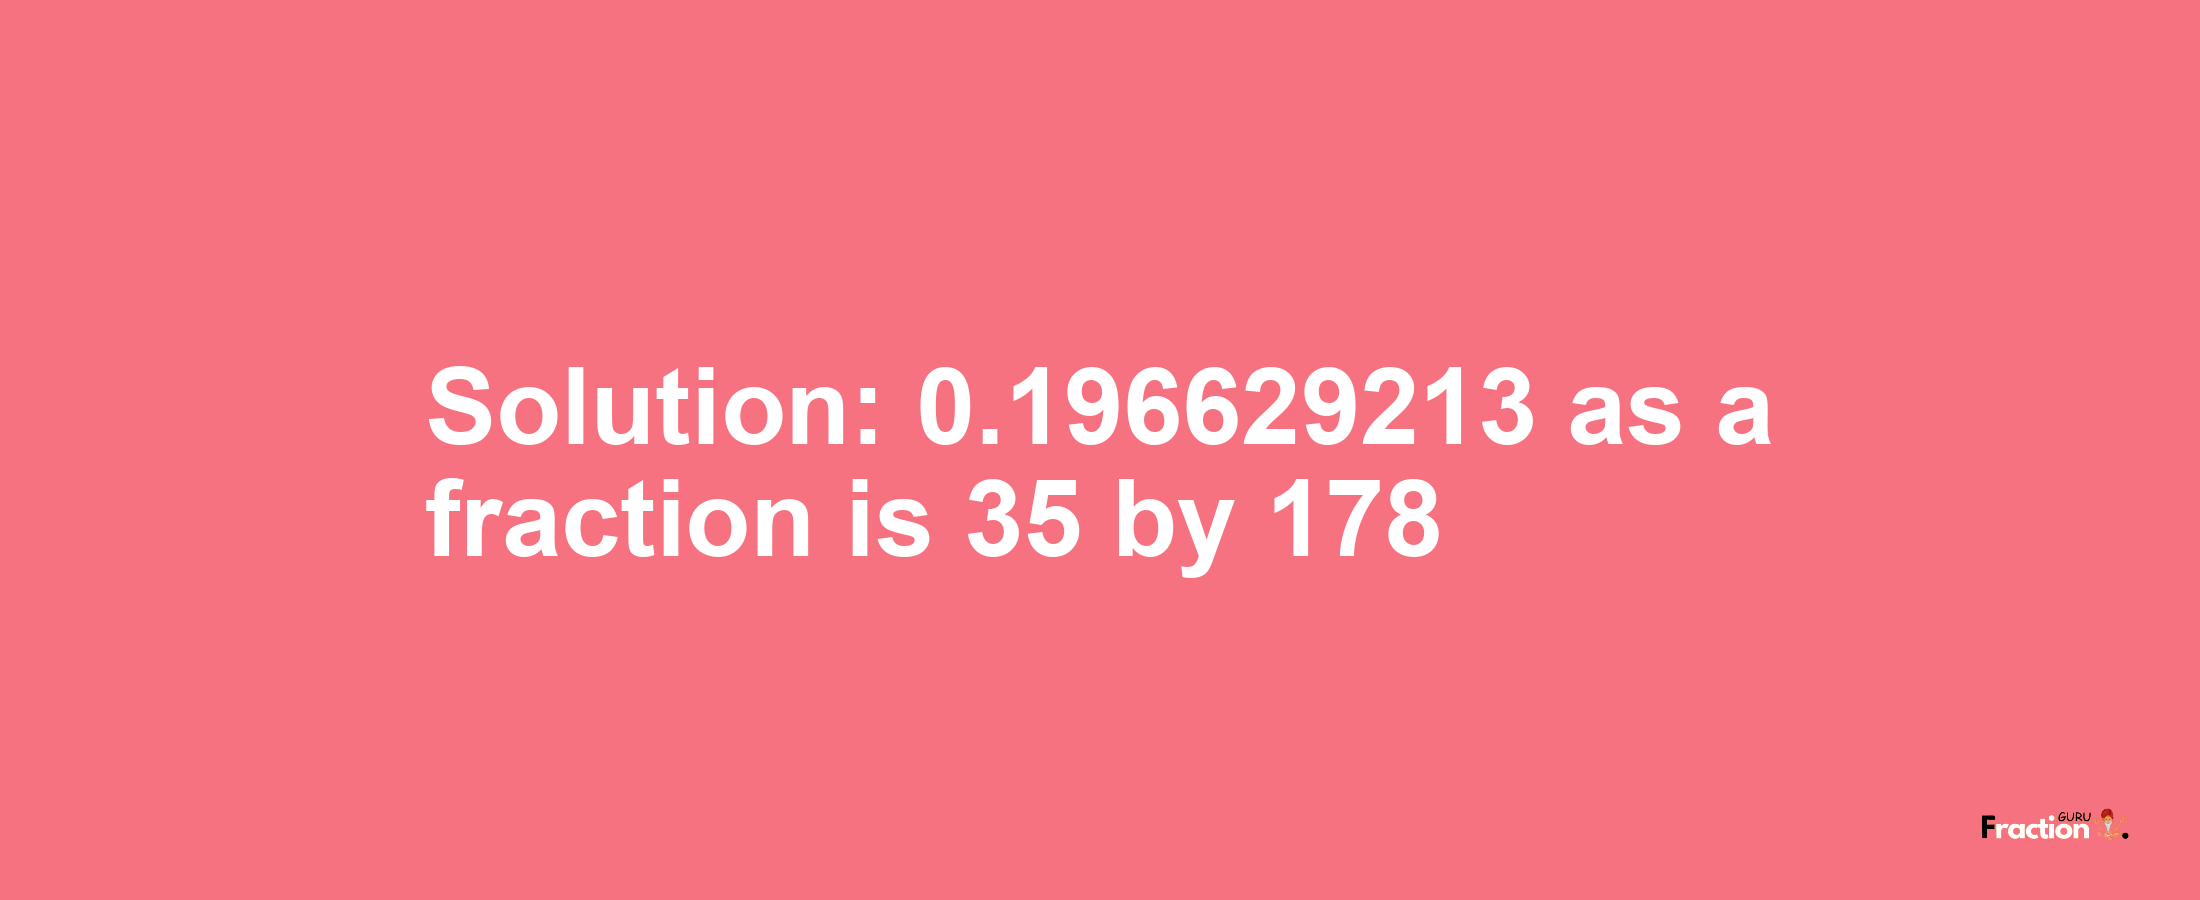 Solution:0.196629213 as a fraction is 35/178